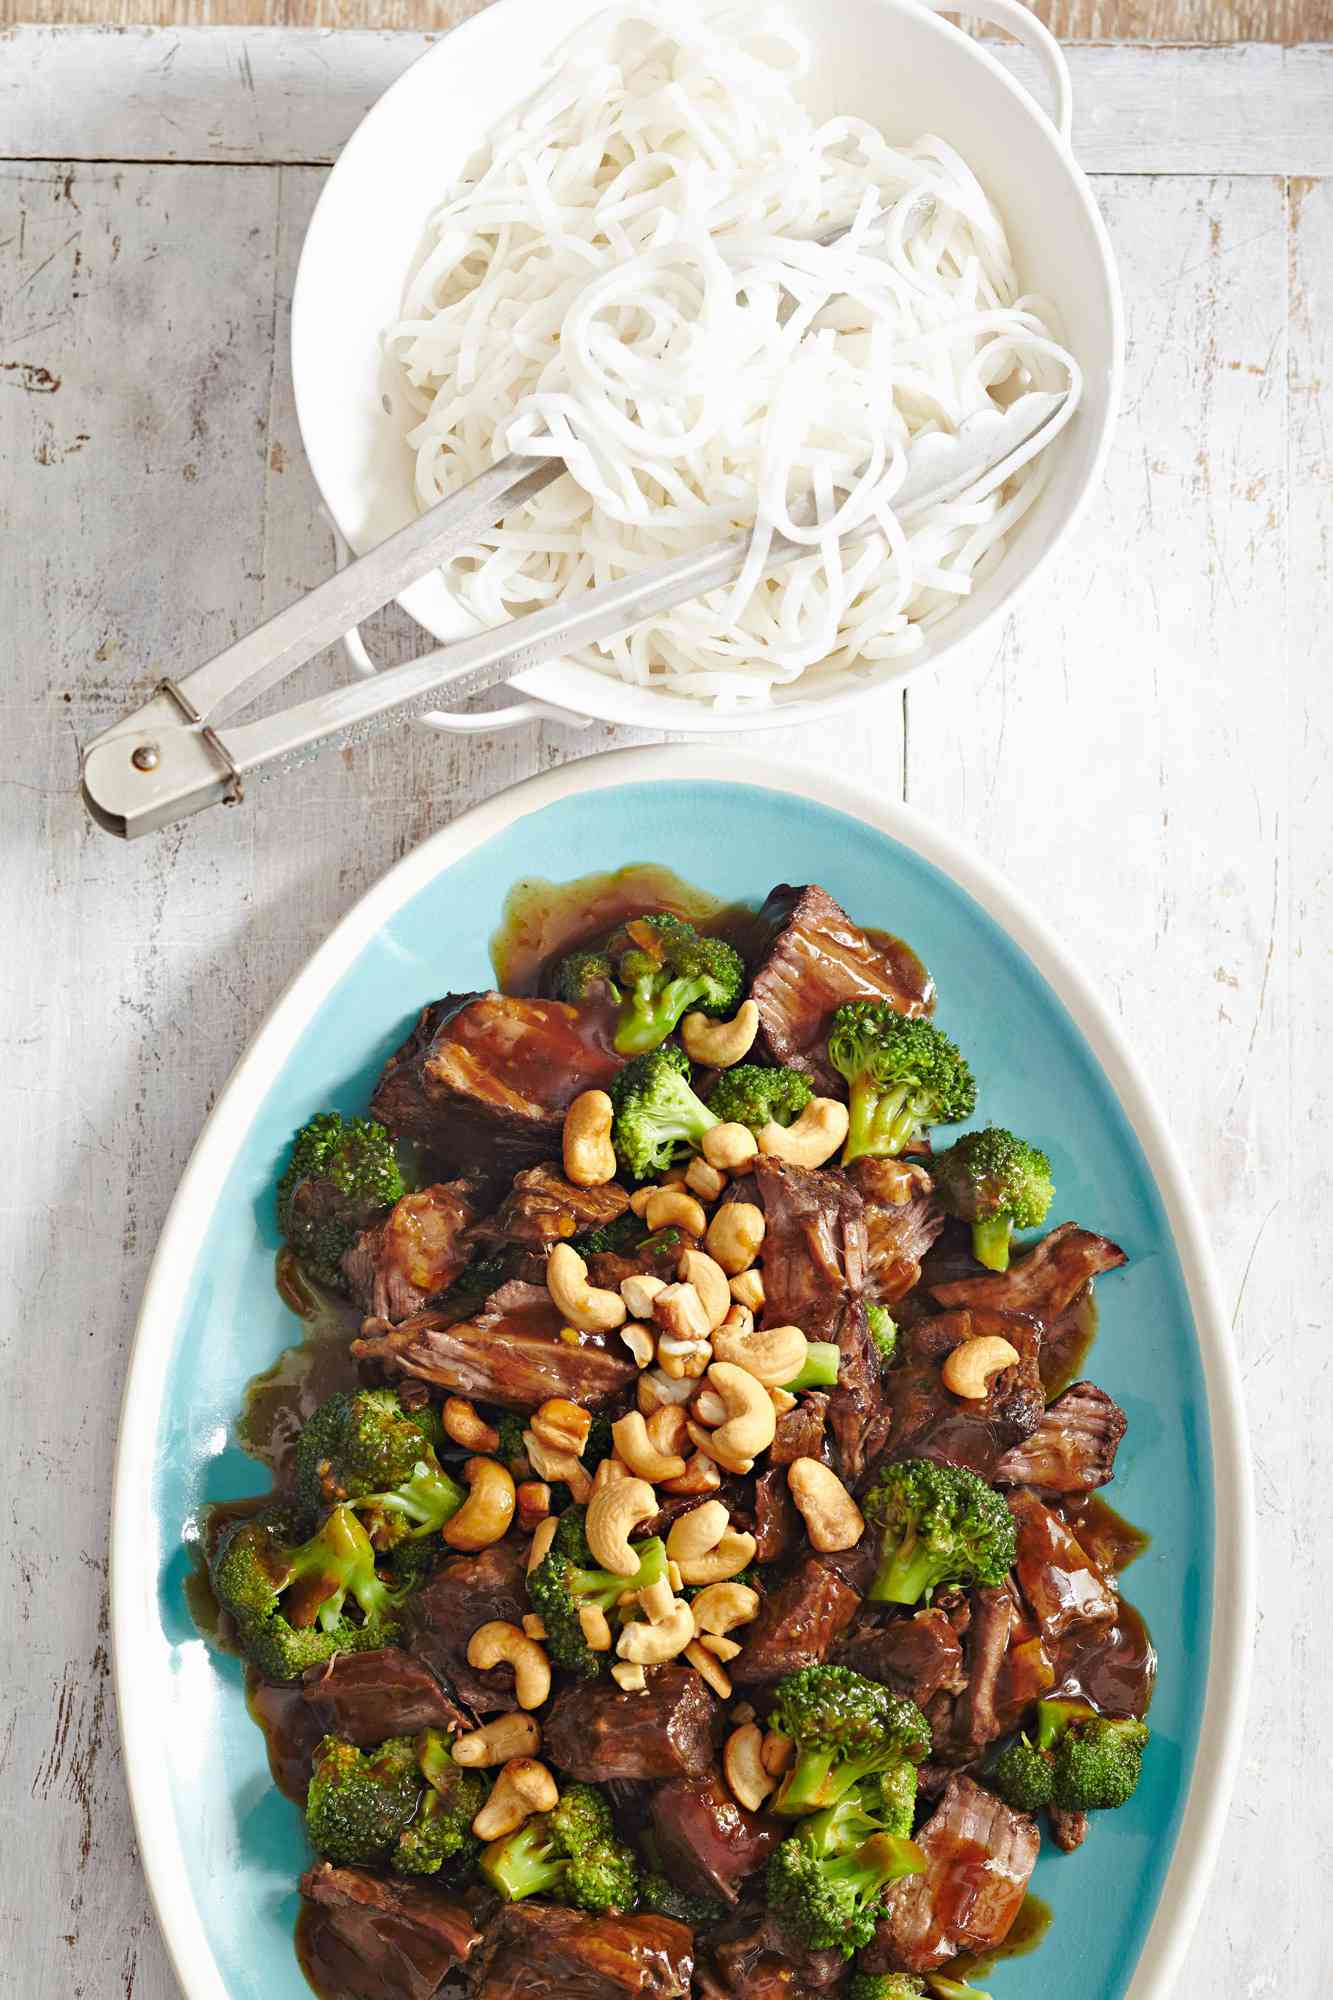 Asian Broccoli and Beef